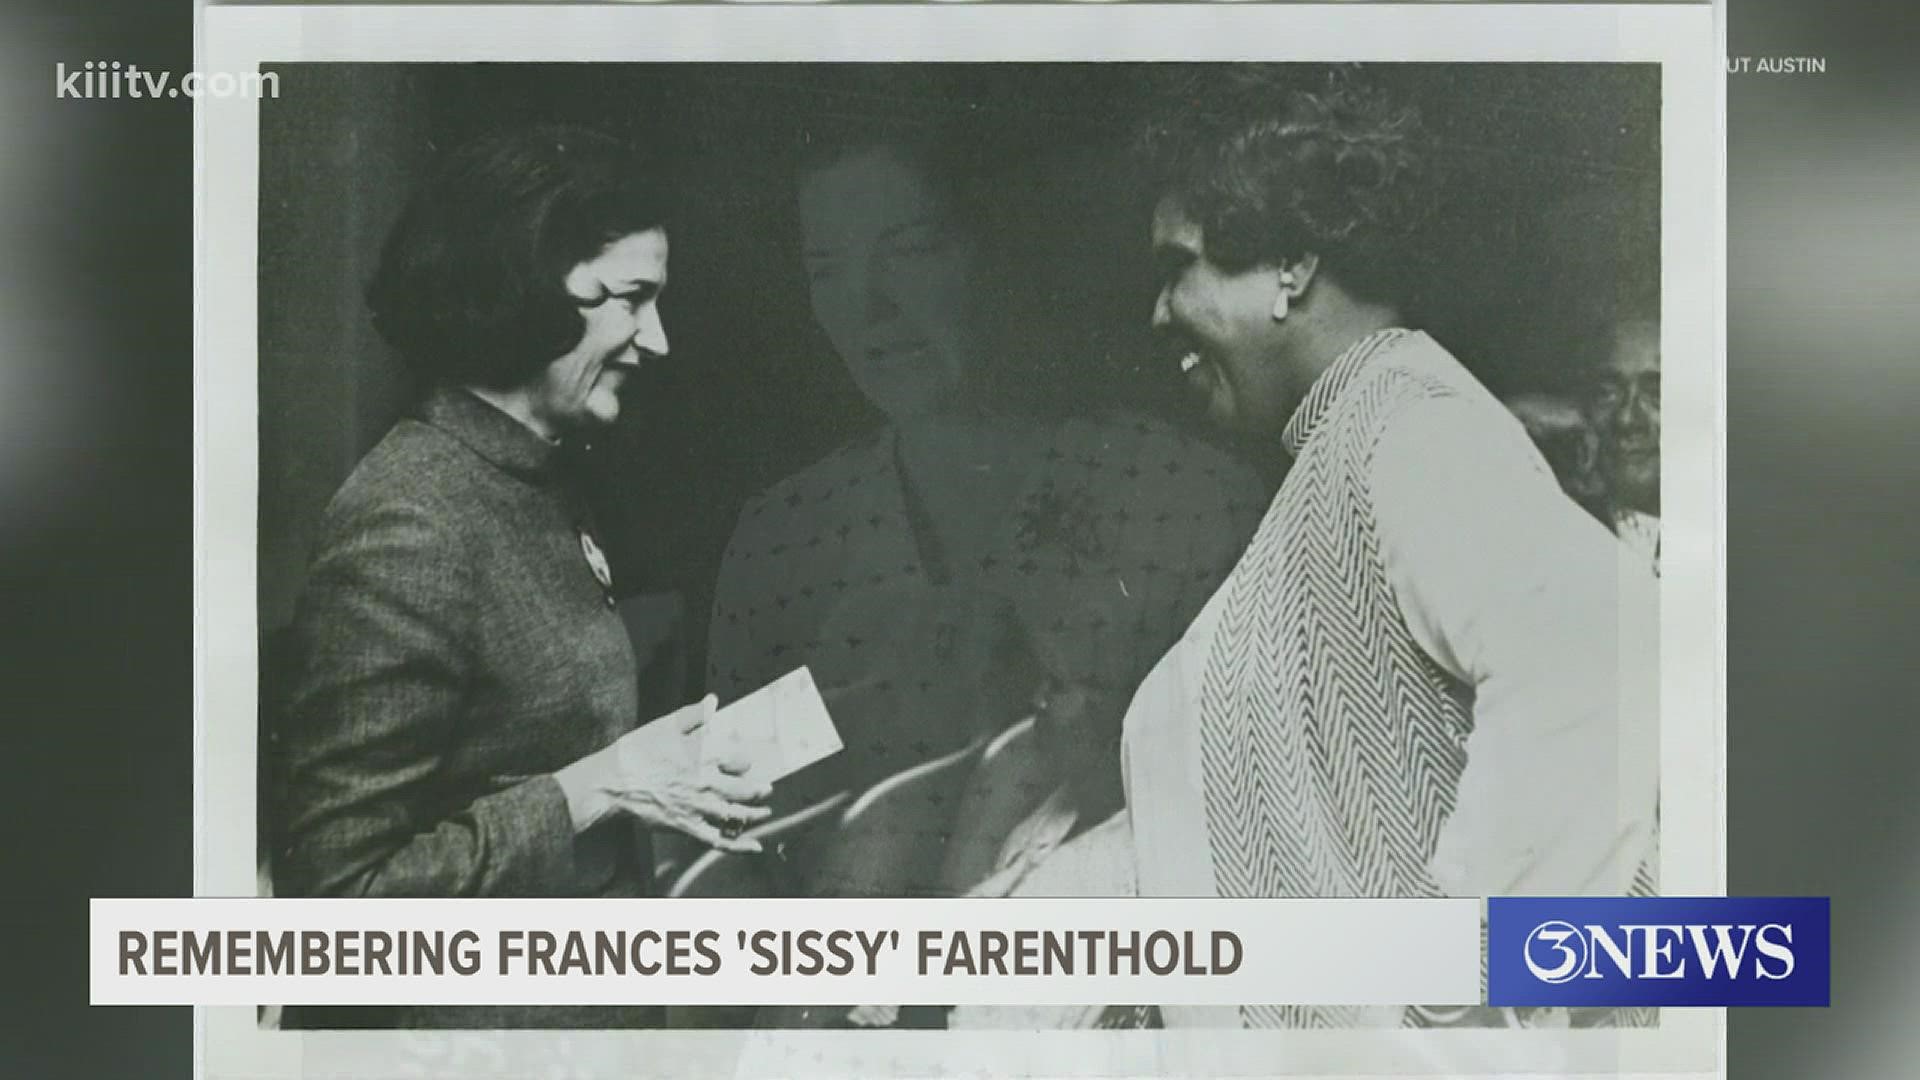 Sissy was born in Corpus Christi in 1926 and spent her life working for equal rights and social justice.